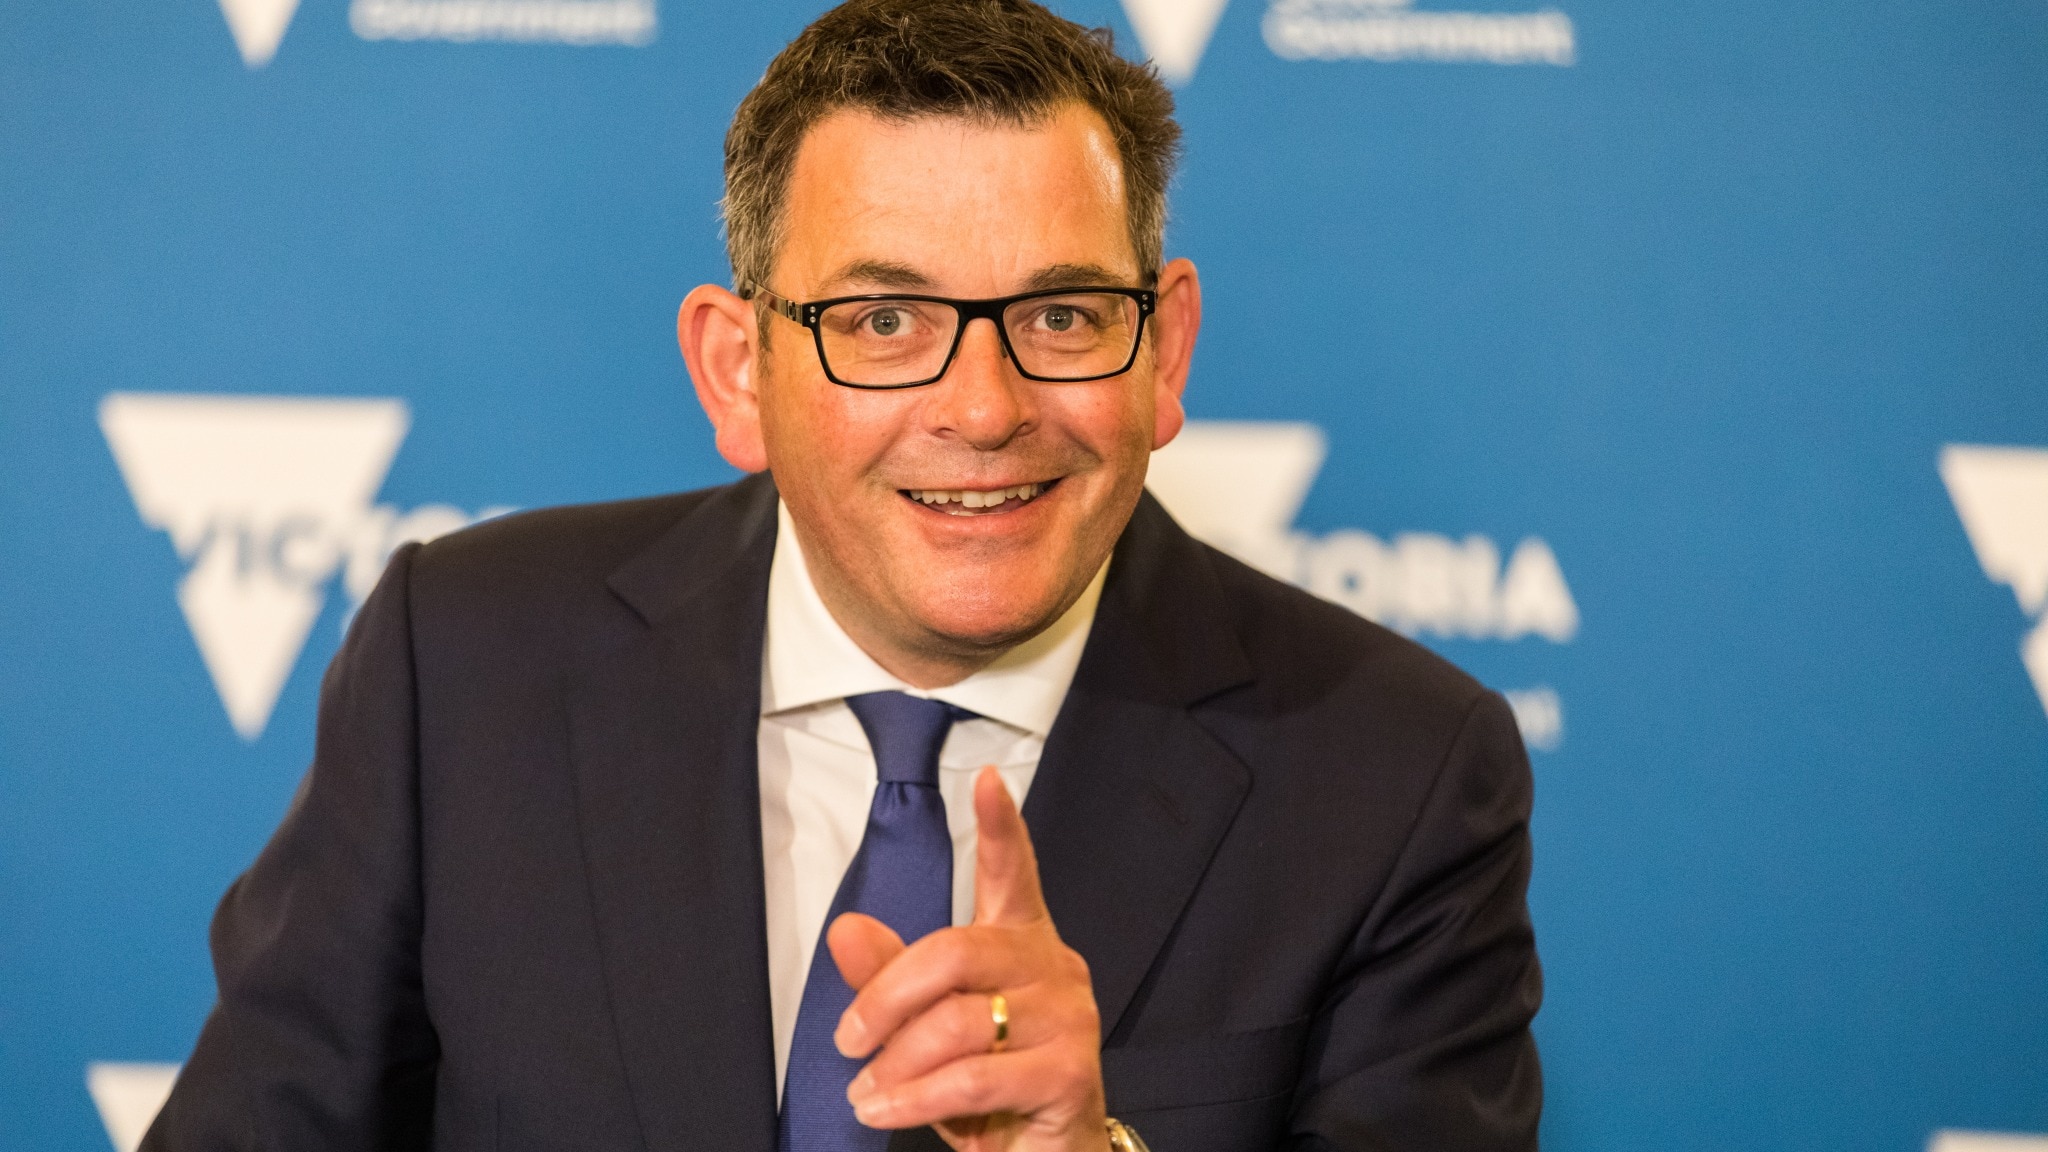 dan-andrews-wins-election-honoured-with-statue-the-oz